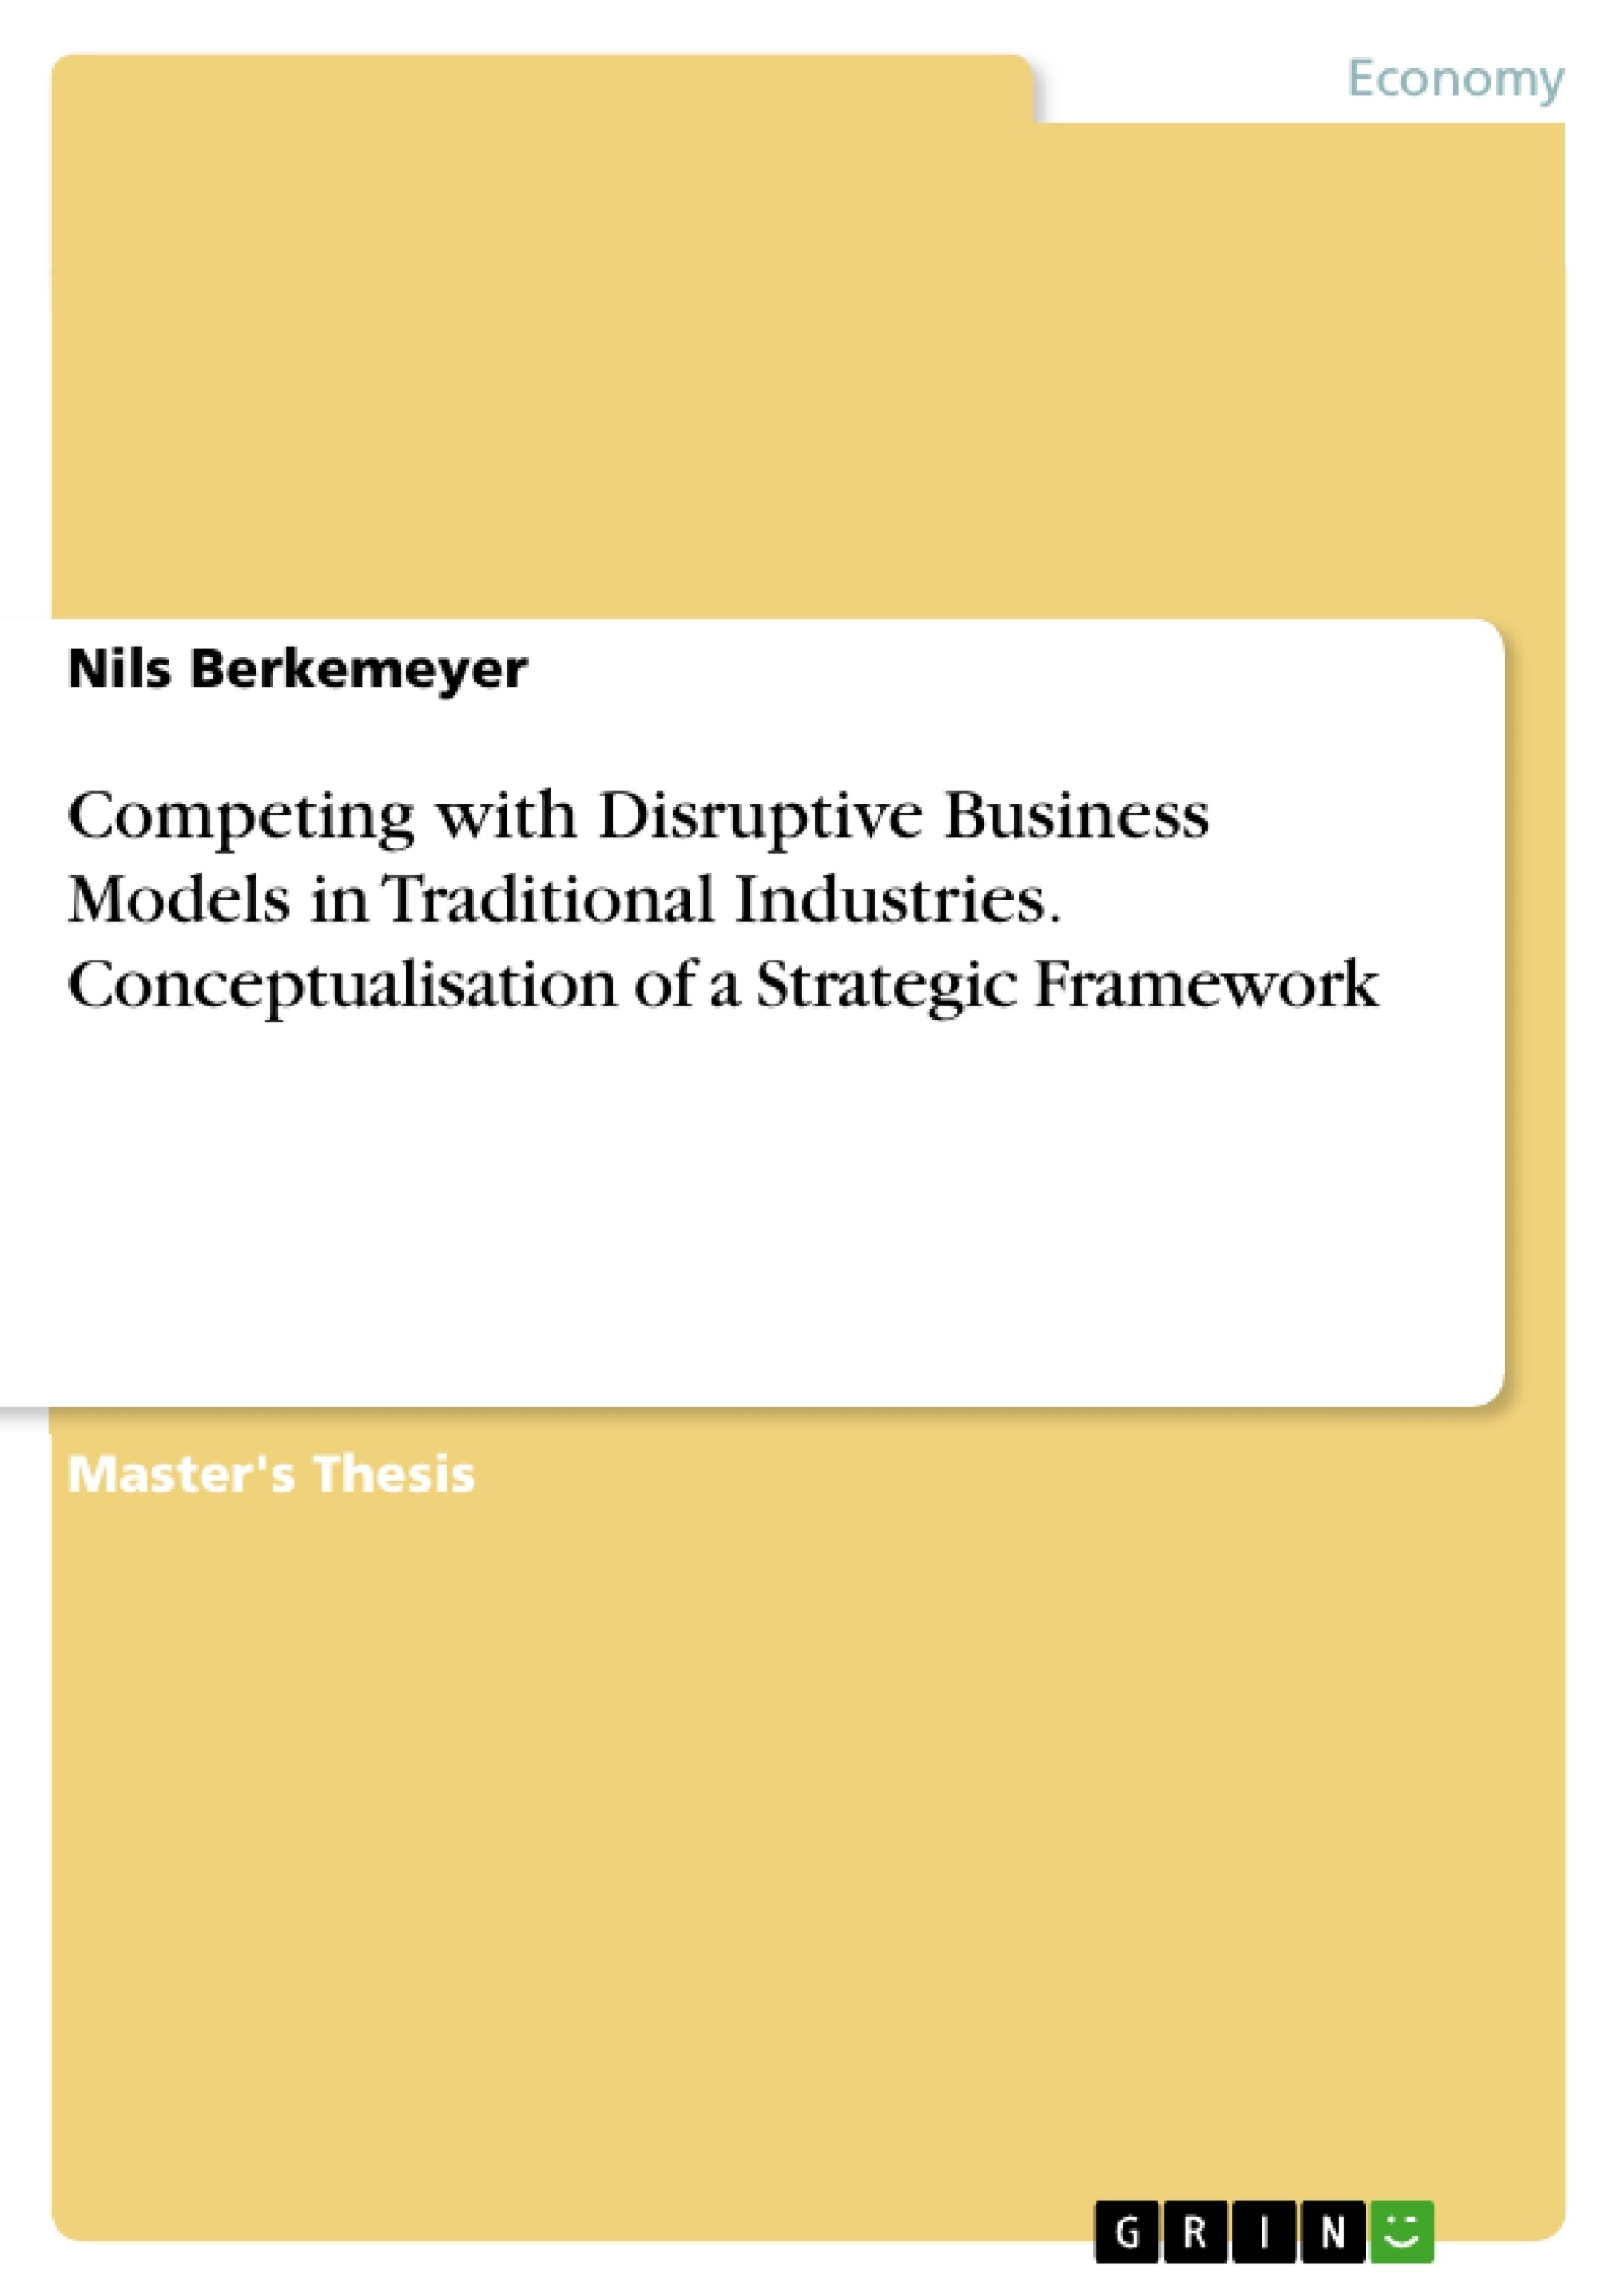 Title: Competing with Disruptive Business Models in Traditional Industries. Conceptualisation of a Strategic Framework